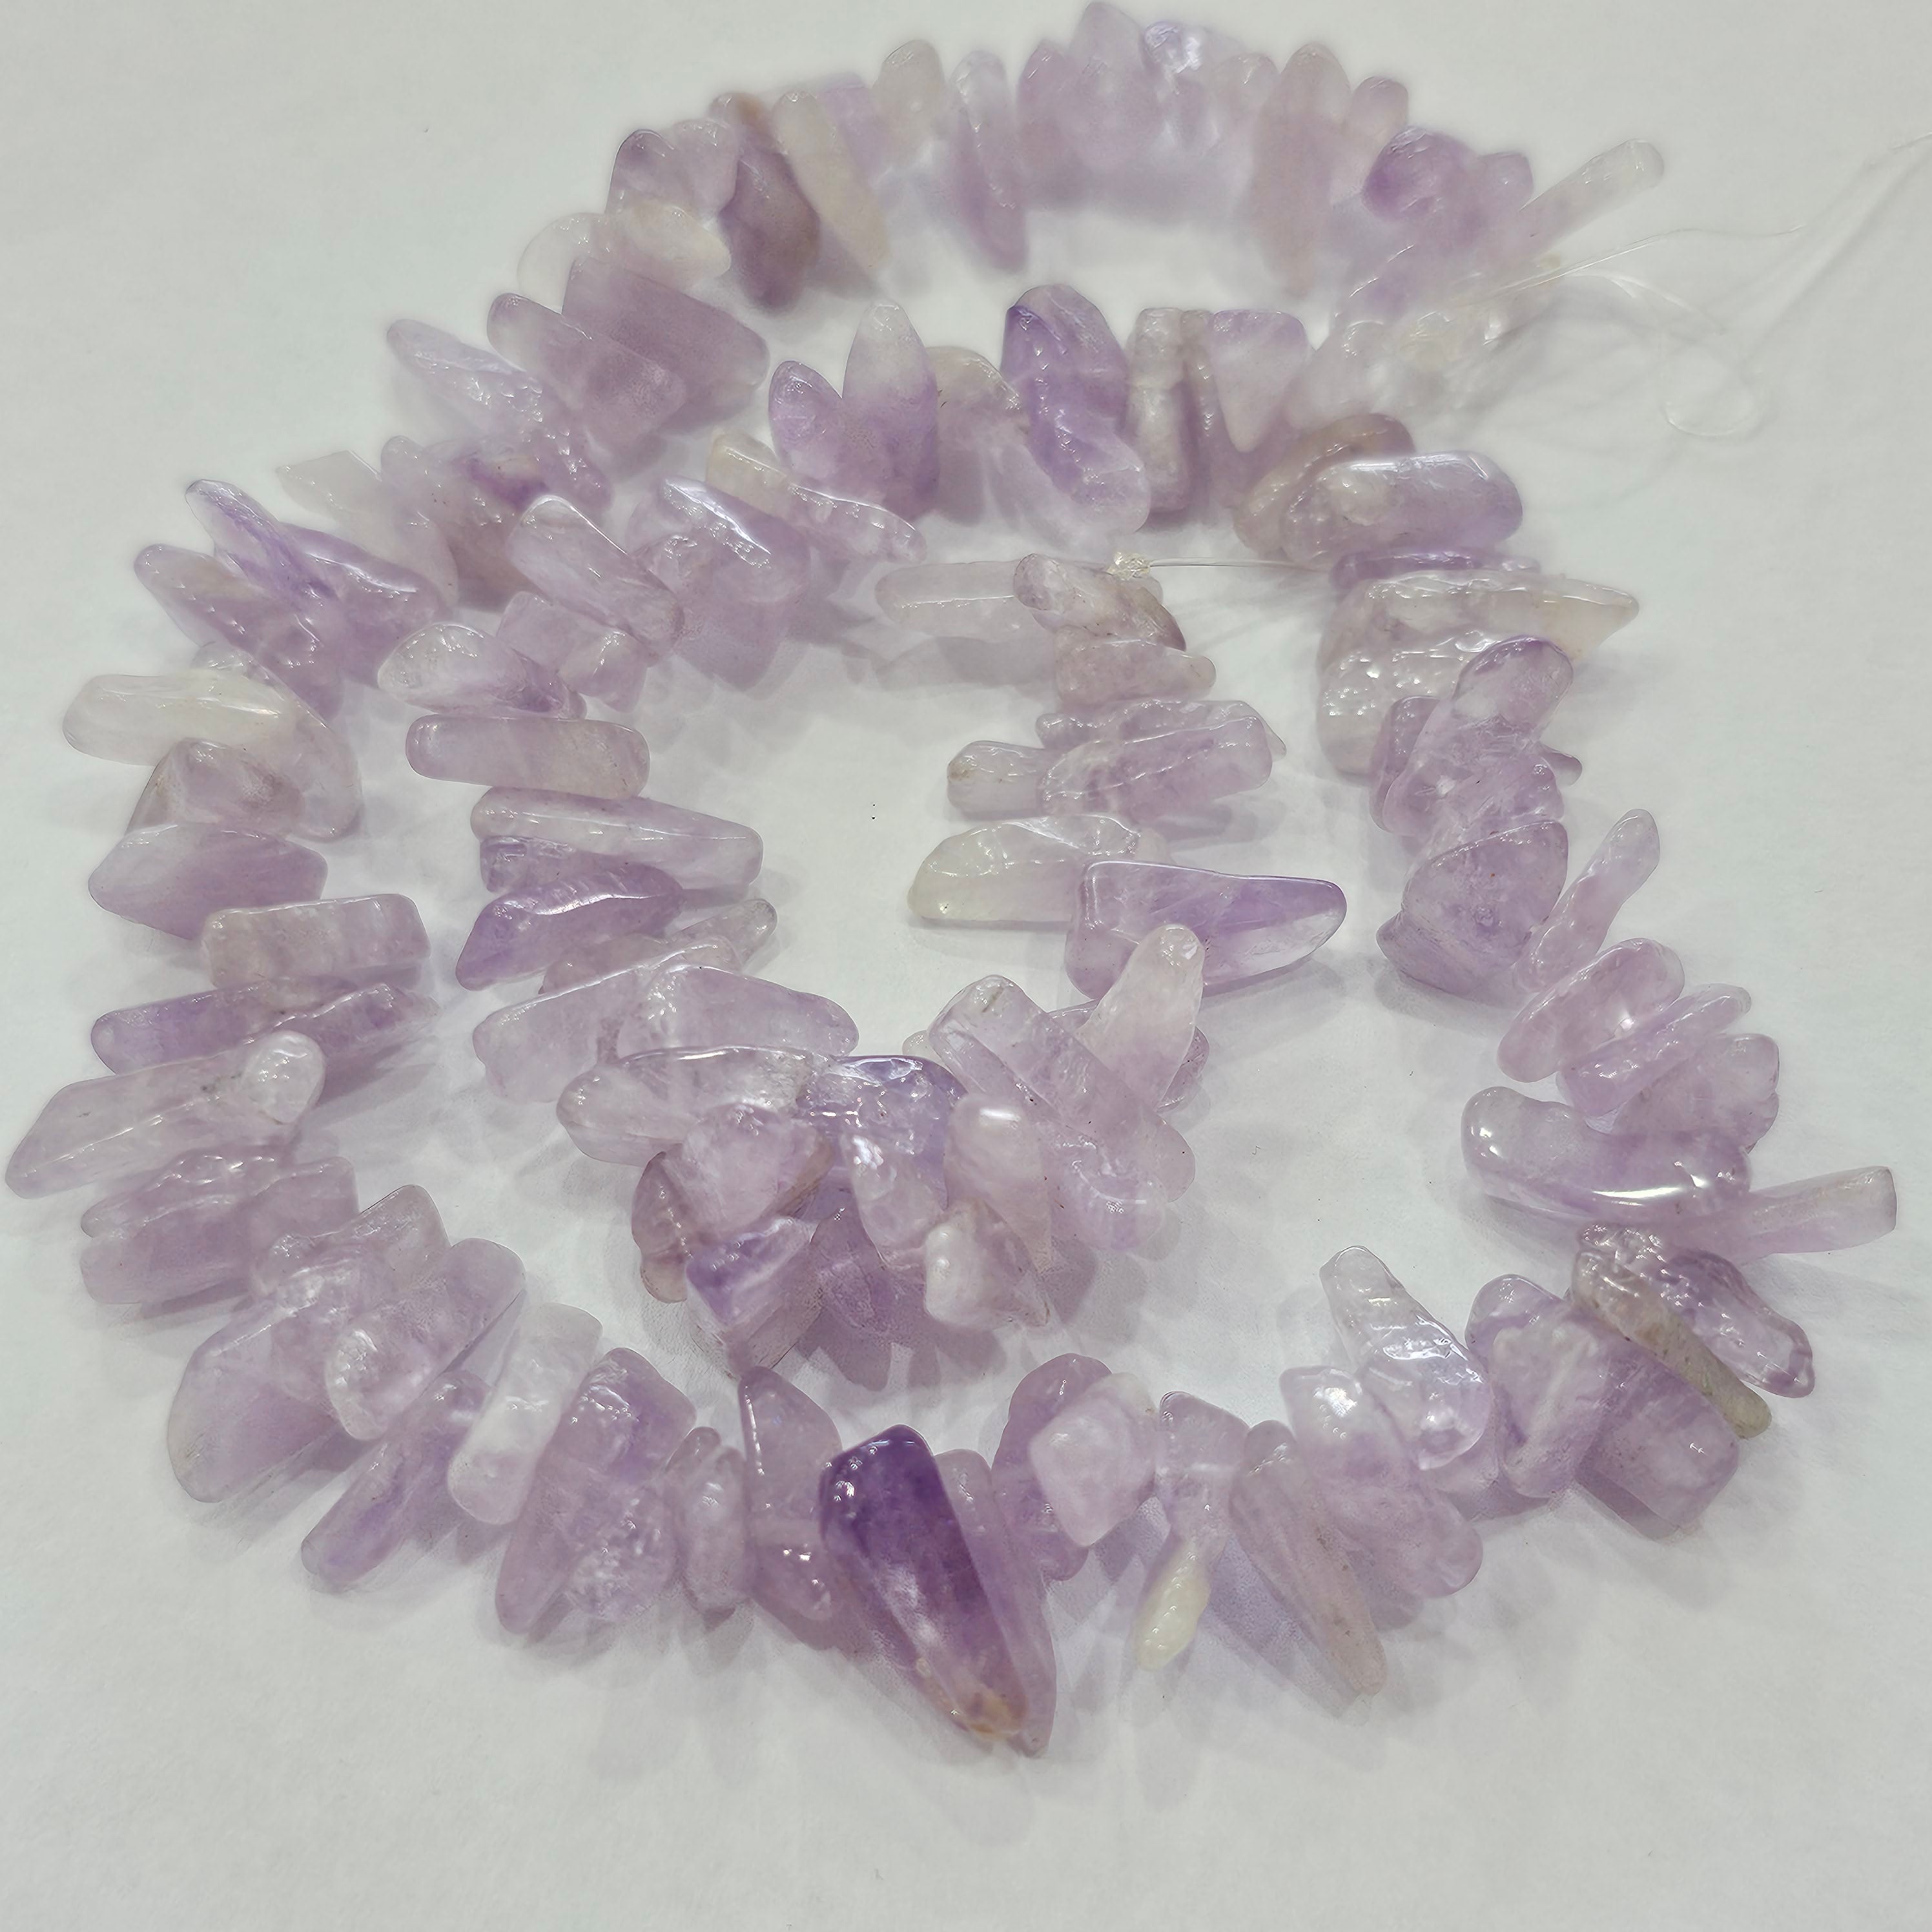 15 Inches Of 1 Line Natural Pink Amethyst Gemstone Fancy Beads Size: 10-16mm - The LabradoriteKing